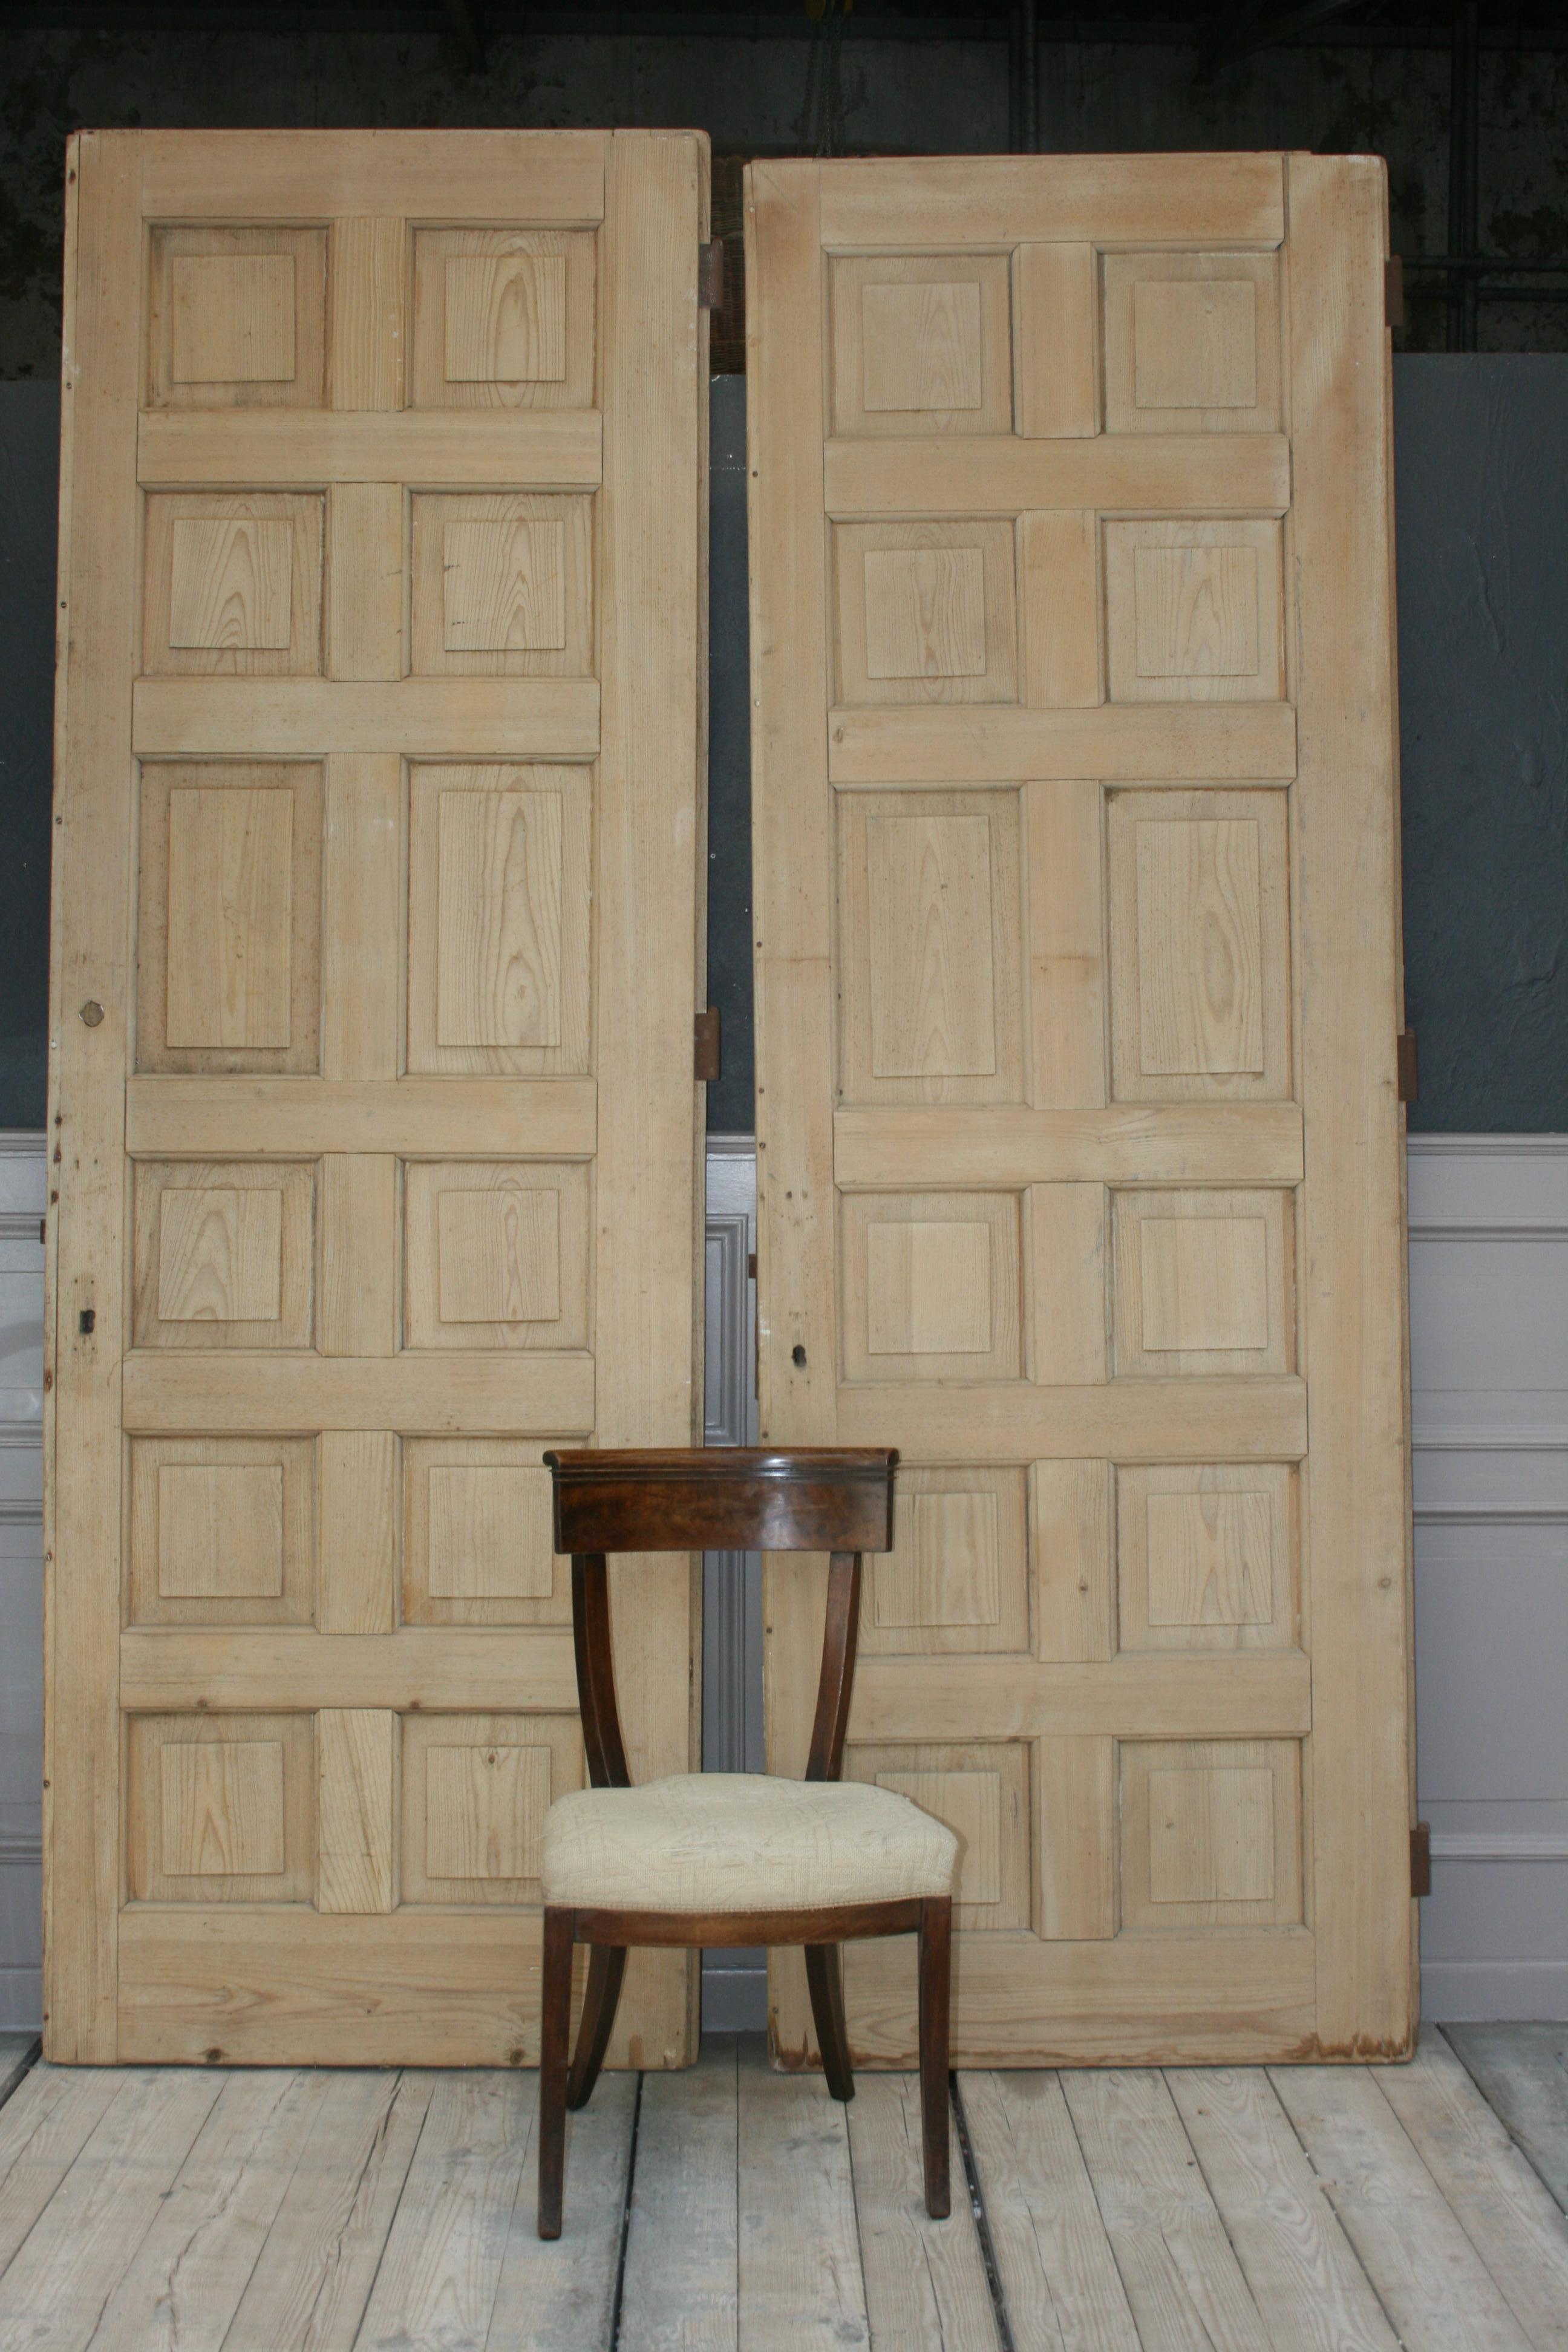 A pair of large antique single apartment doors from an Art Nouveau villa in Zurich (Switzerland) made of leached softwood. Both doors each have 12 cassettes, one of which is made of oak wood and can be opened with a brass handle as a small window.